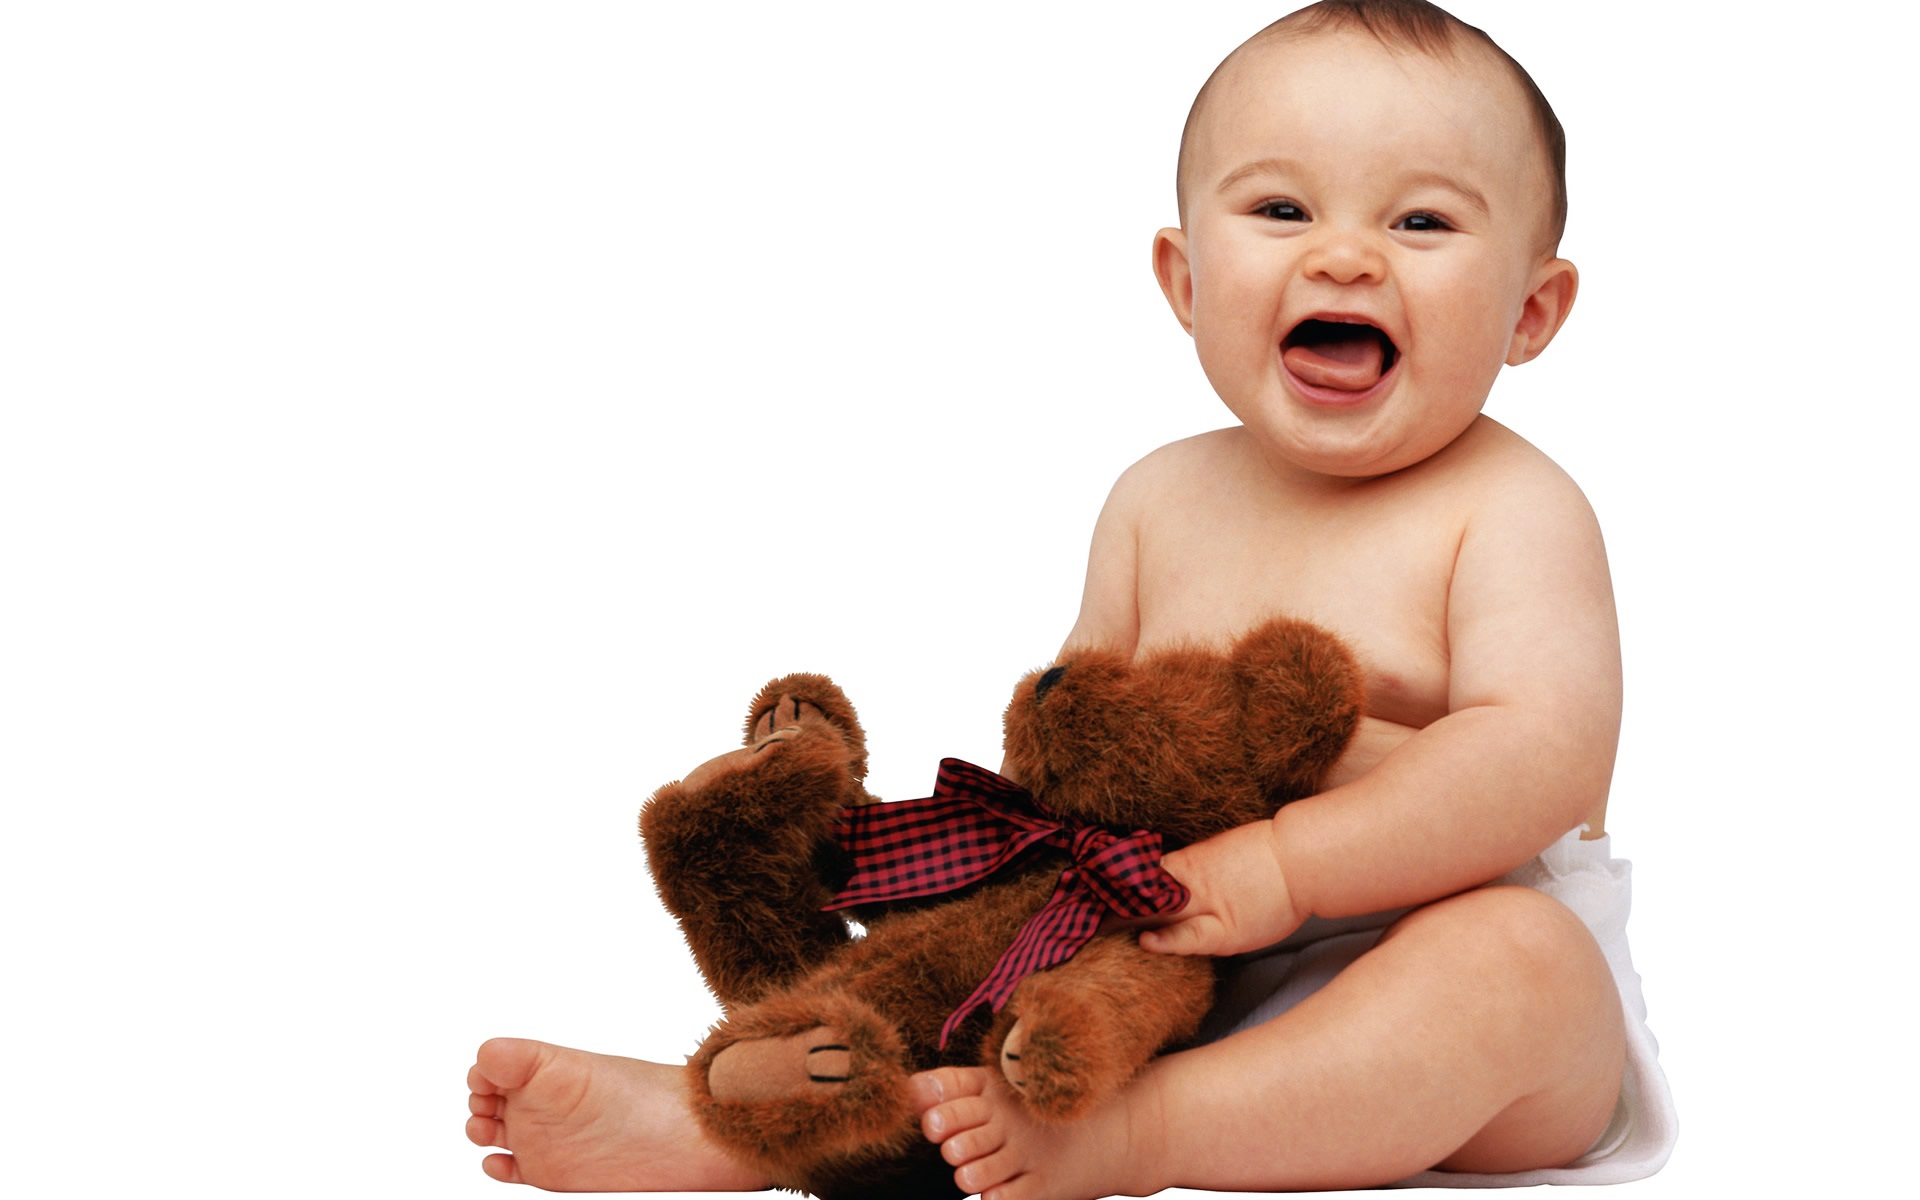 Cute Baby with Teddy Wallpapers HD Wallpapers 1920x1200